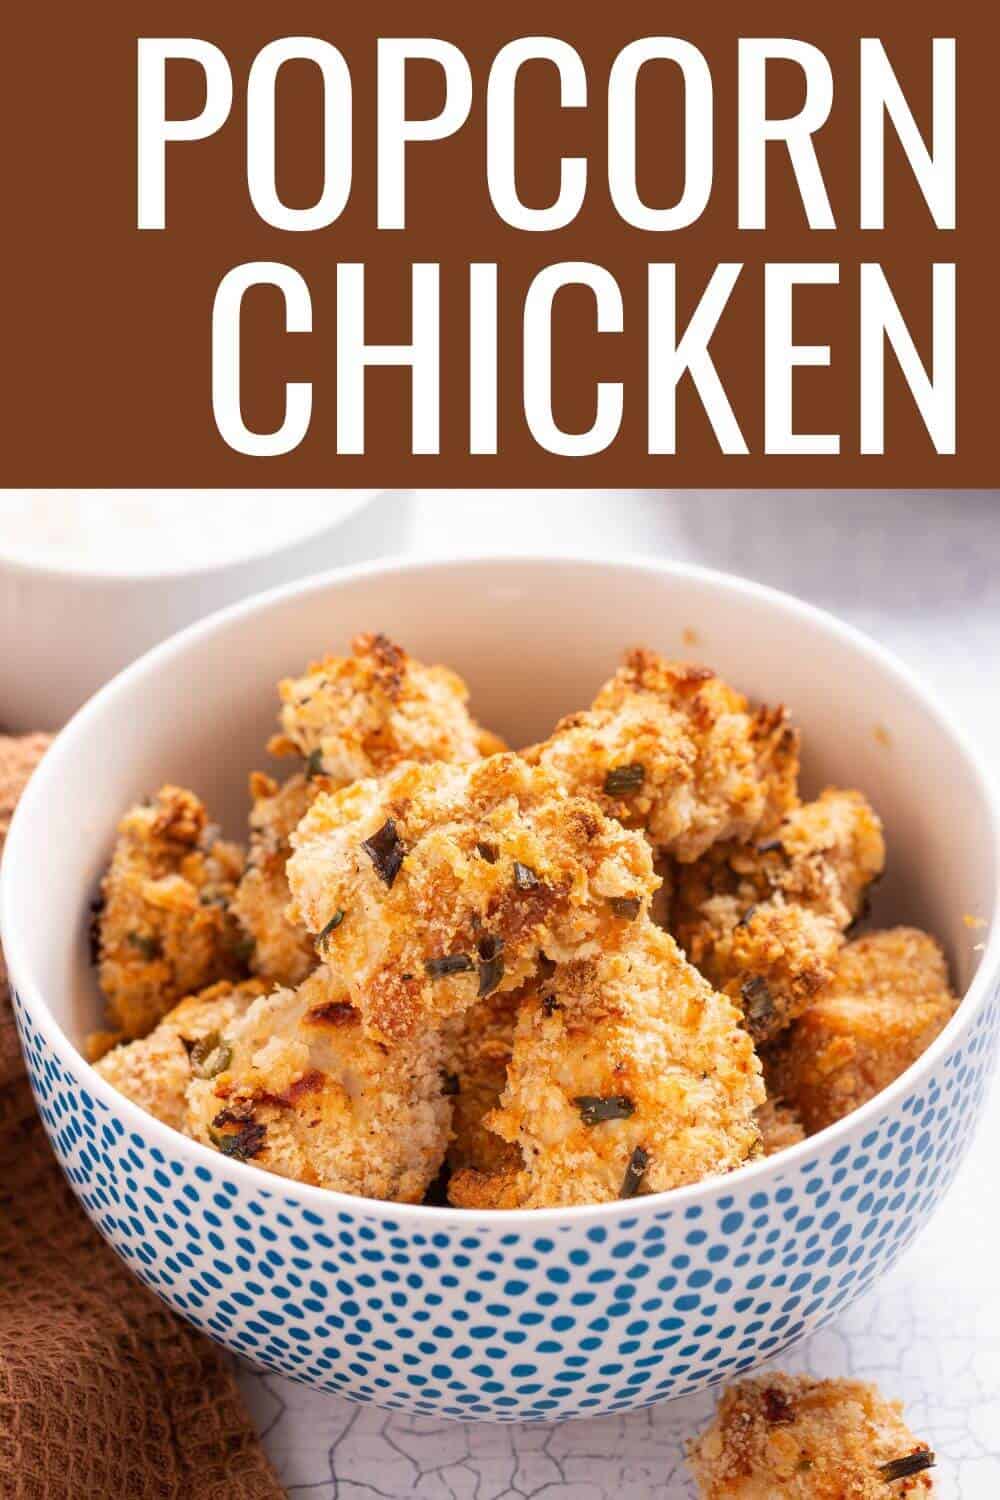 Popcorn chicken in bowl with title text overlay.